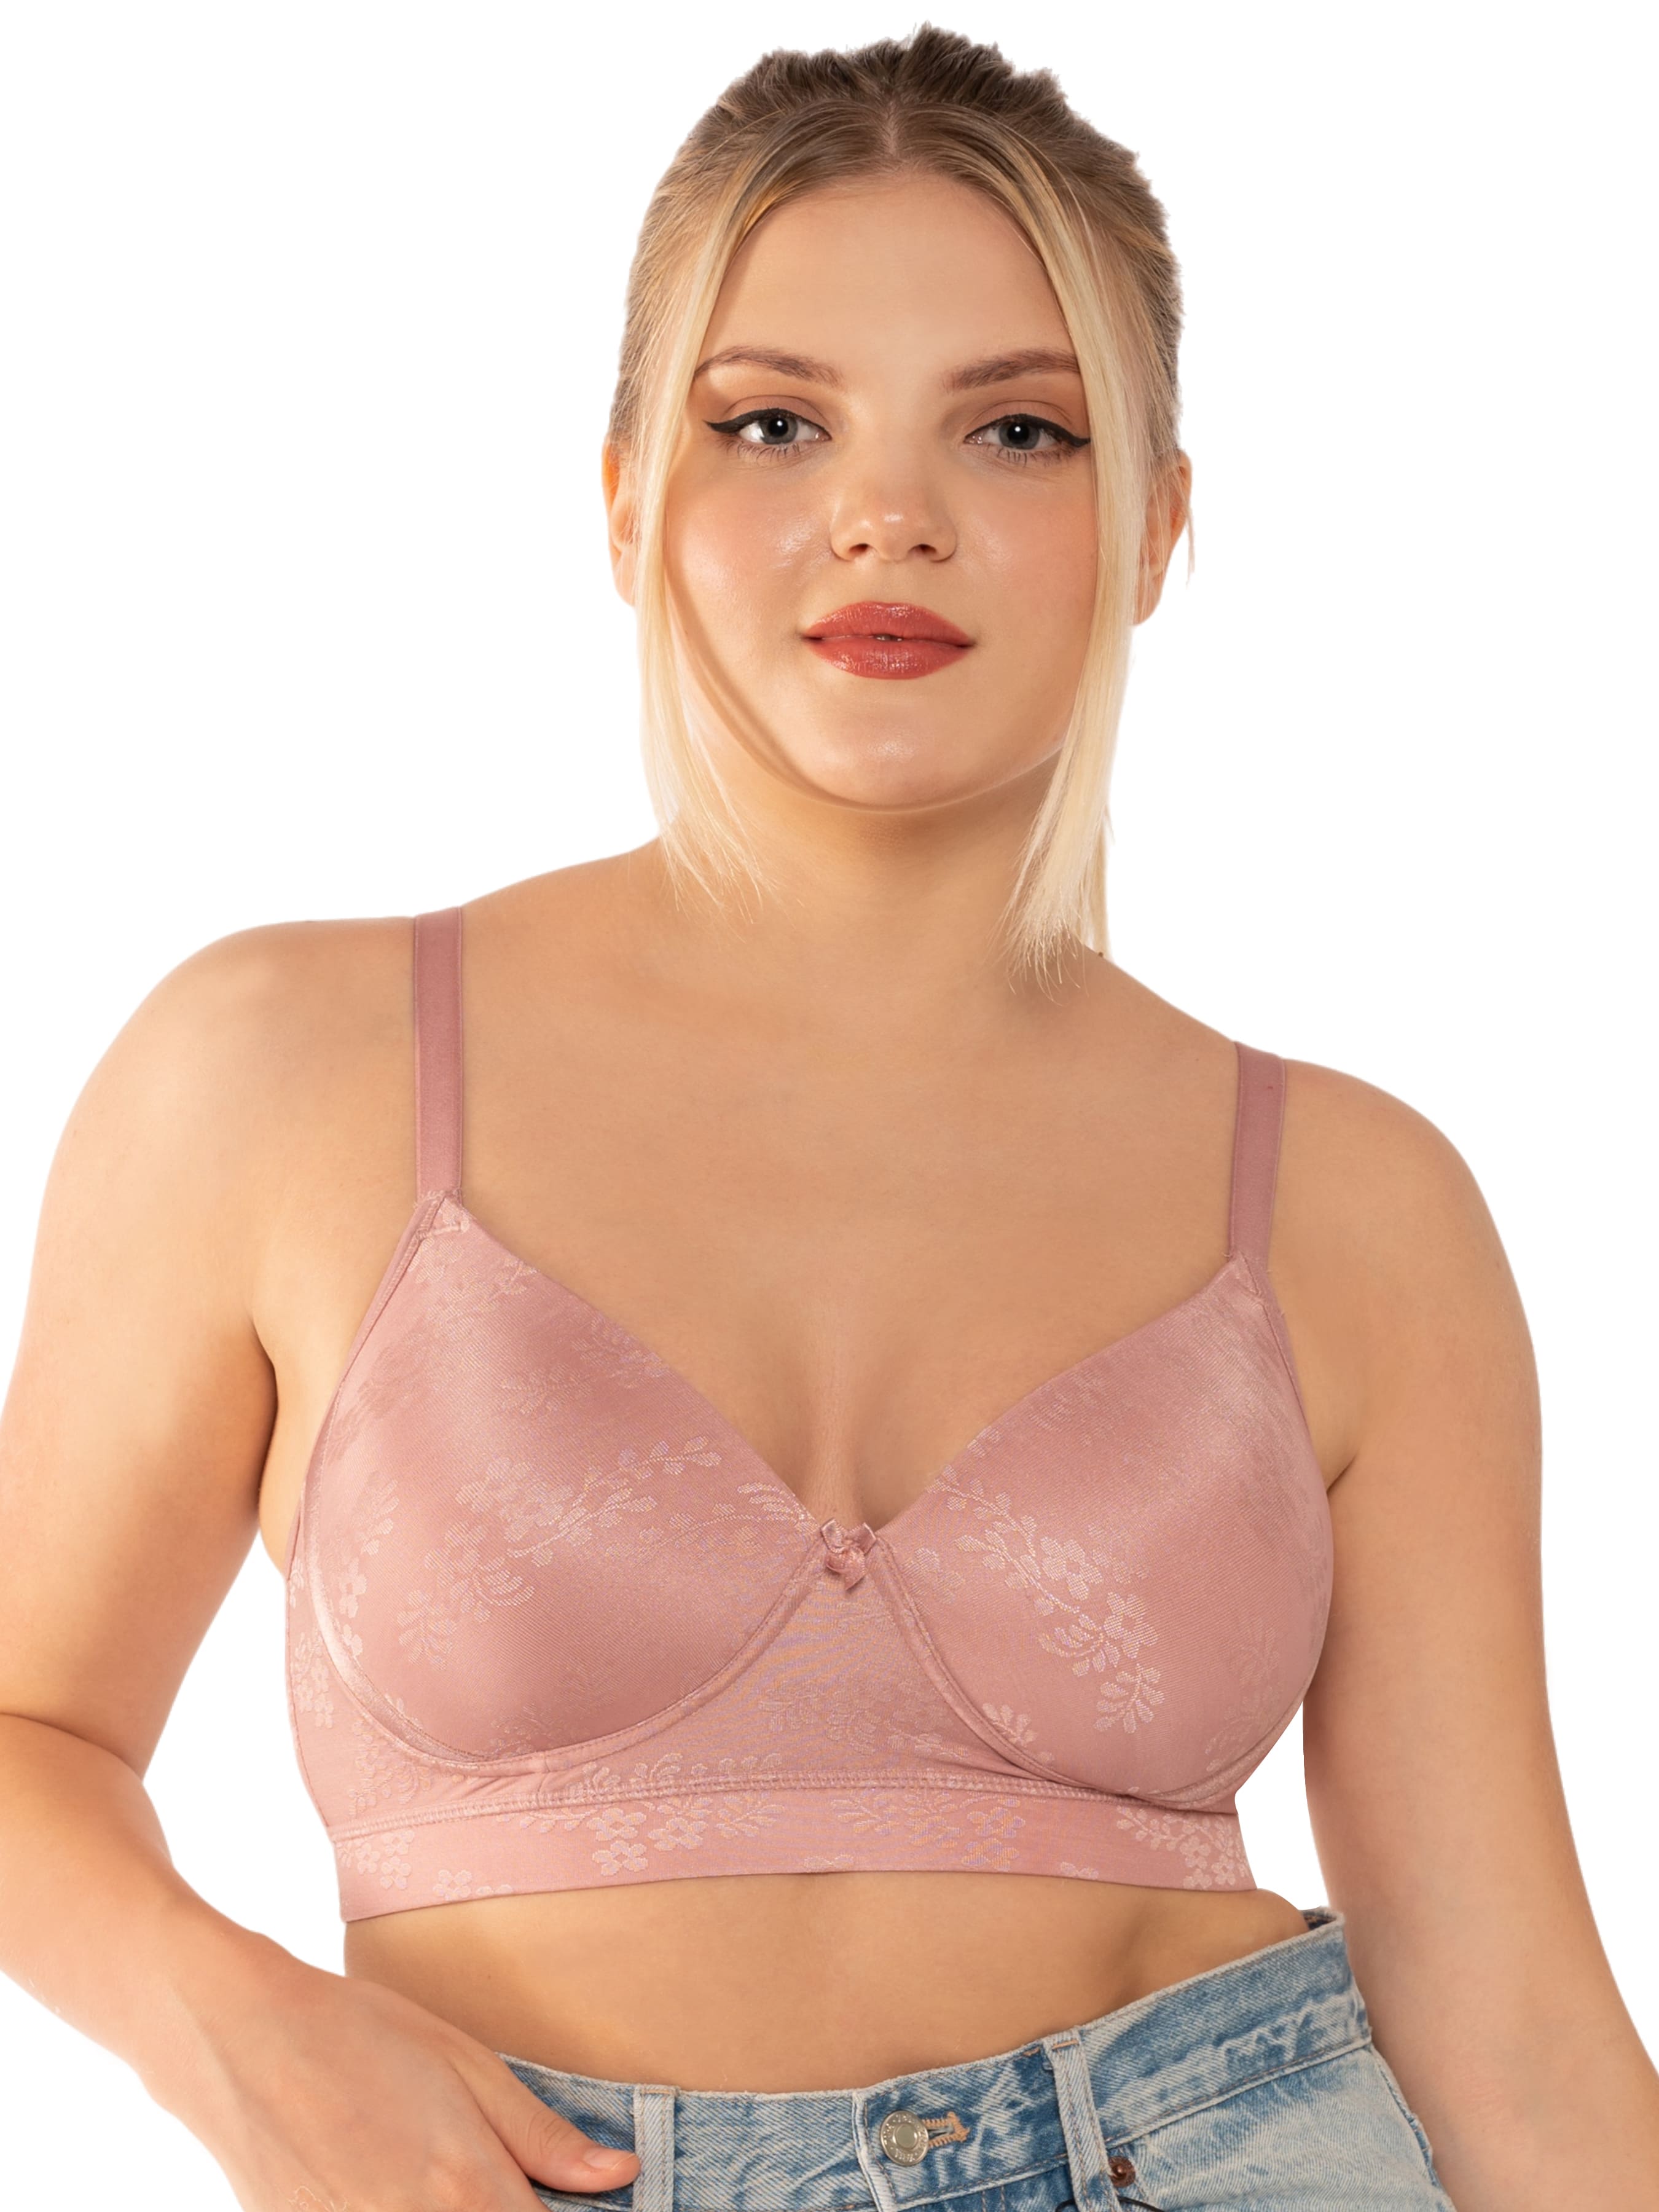 Zivira Plus Size T-Shirt Bra with Seamless Cups and Comfortable Straps